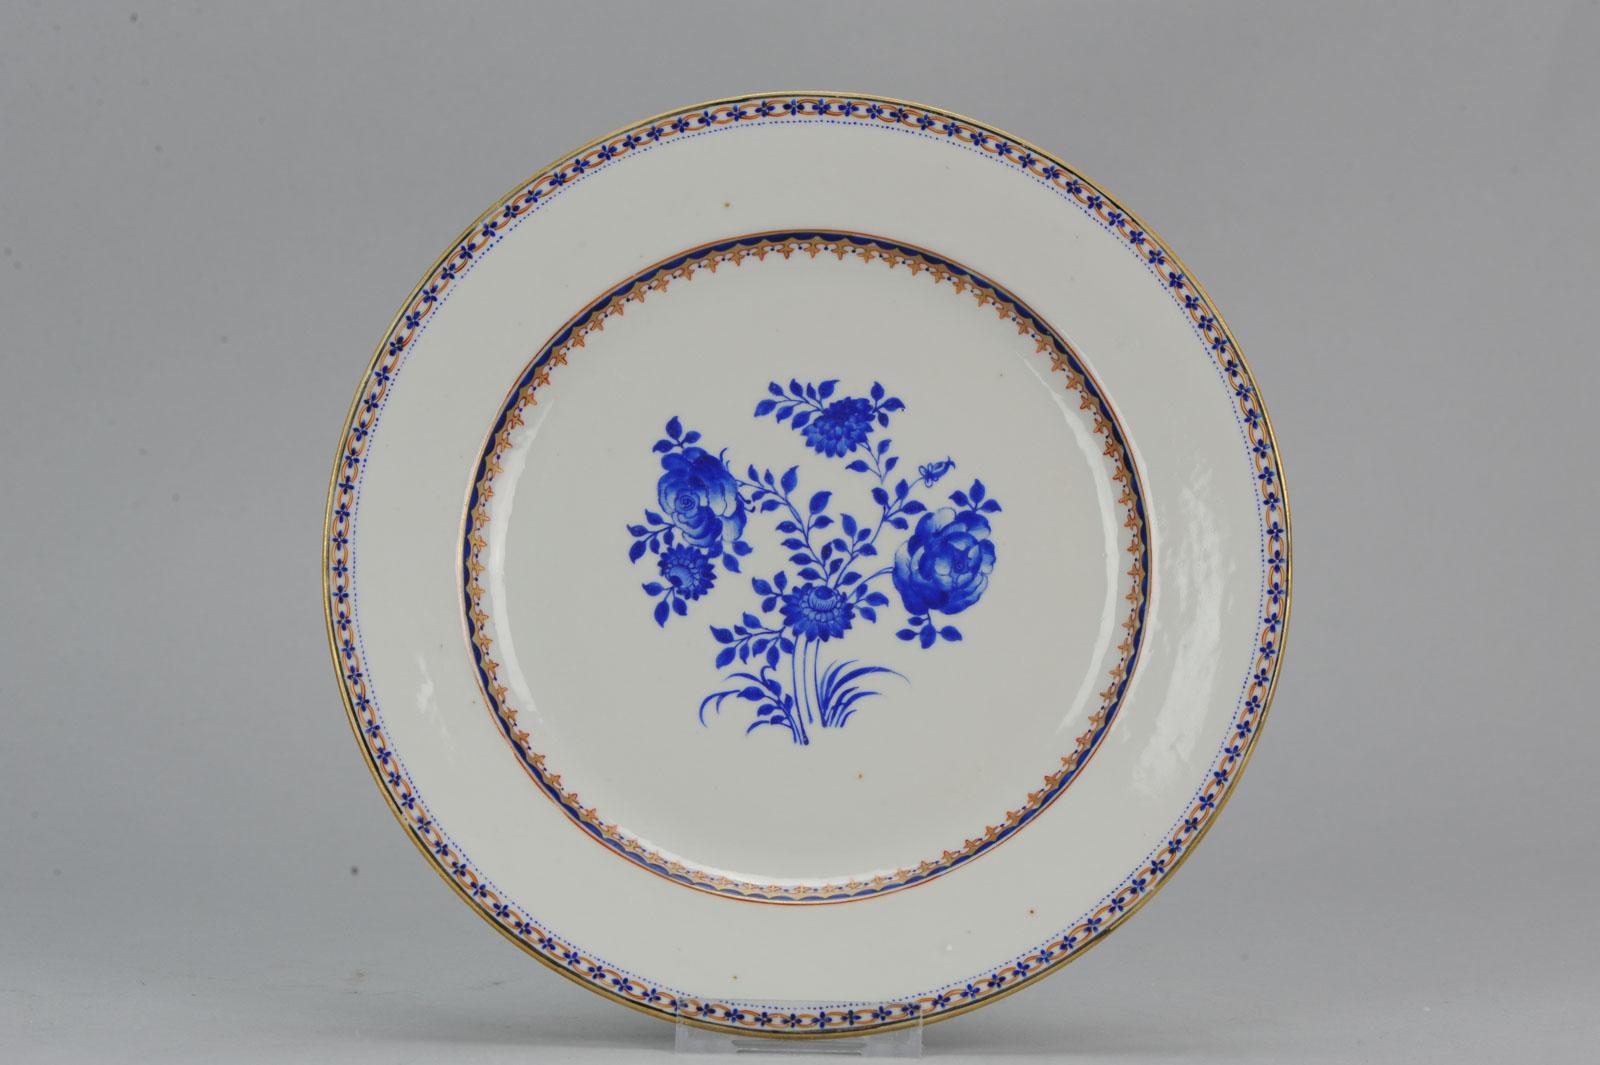 Porcelain Very Rare Antique Chinese 18th Century Qianlong Period Dinner Plate Qing For Sale